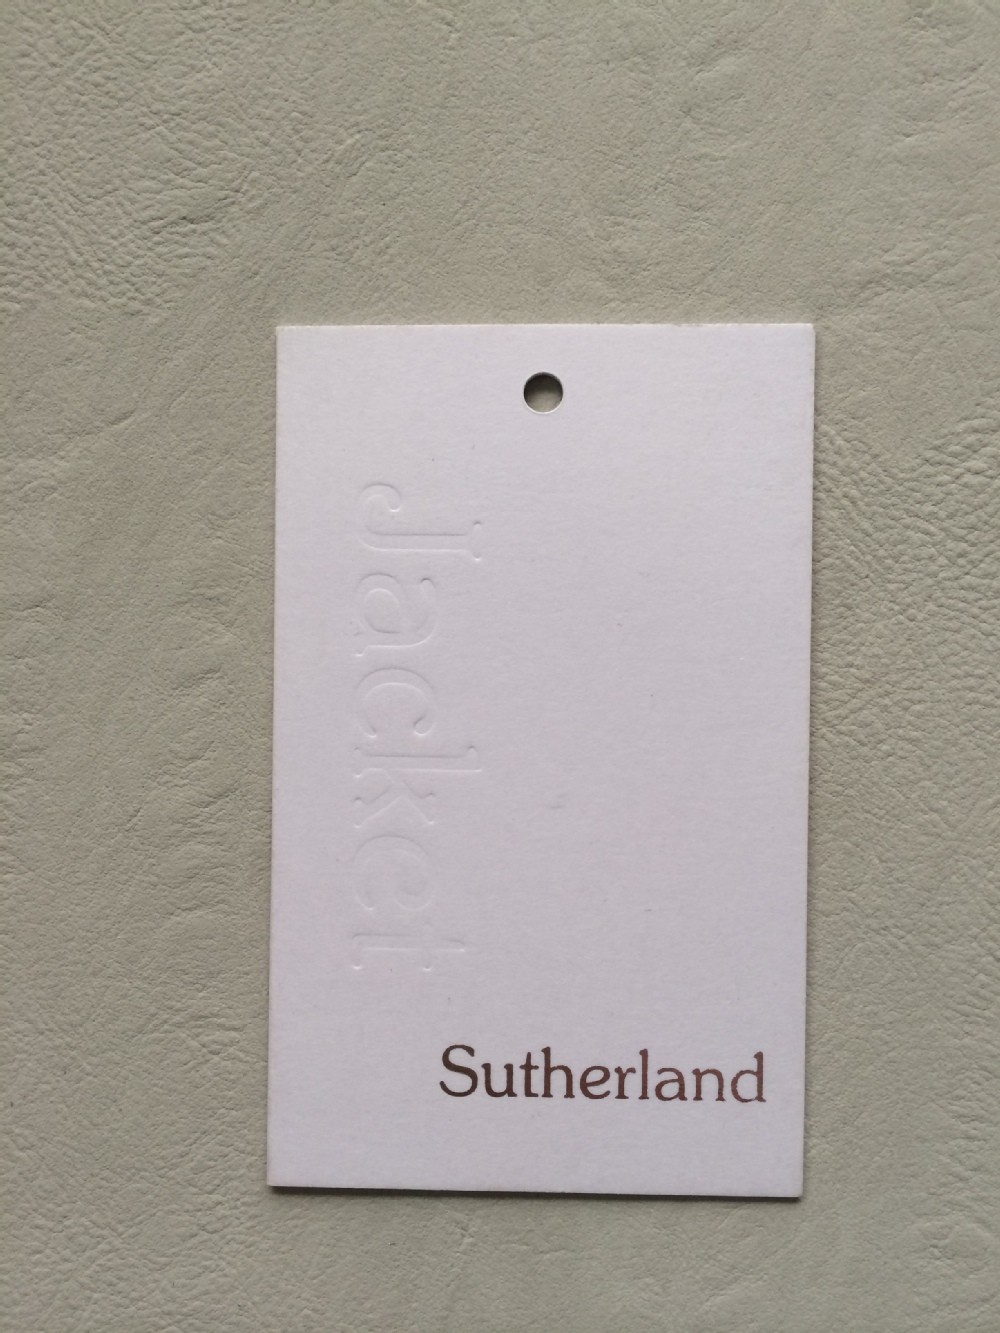 Personalized garment hang tags